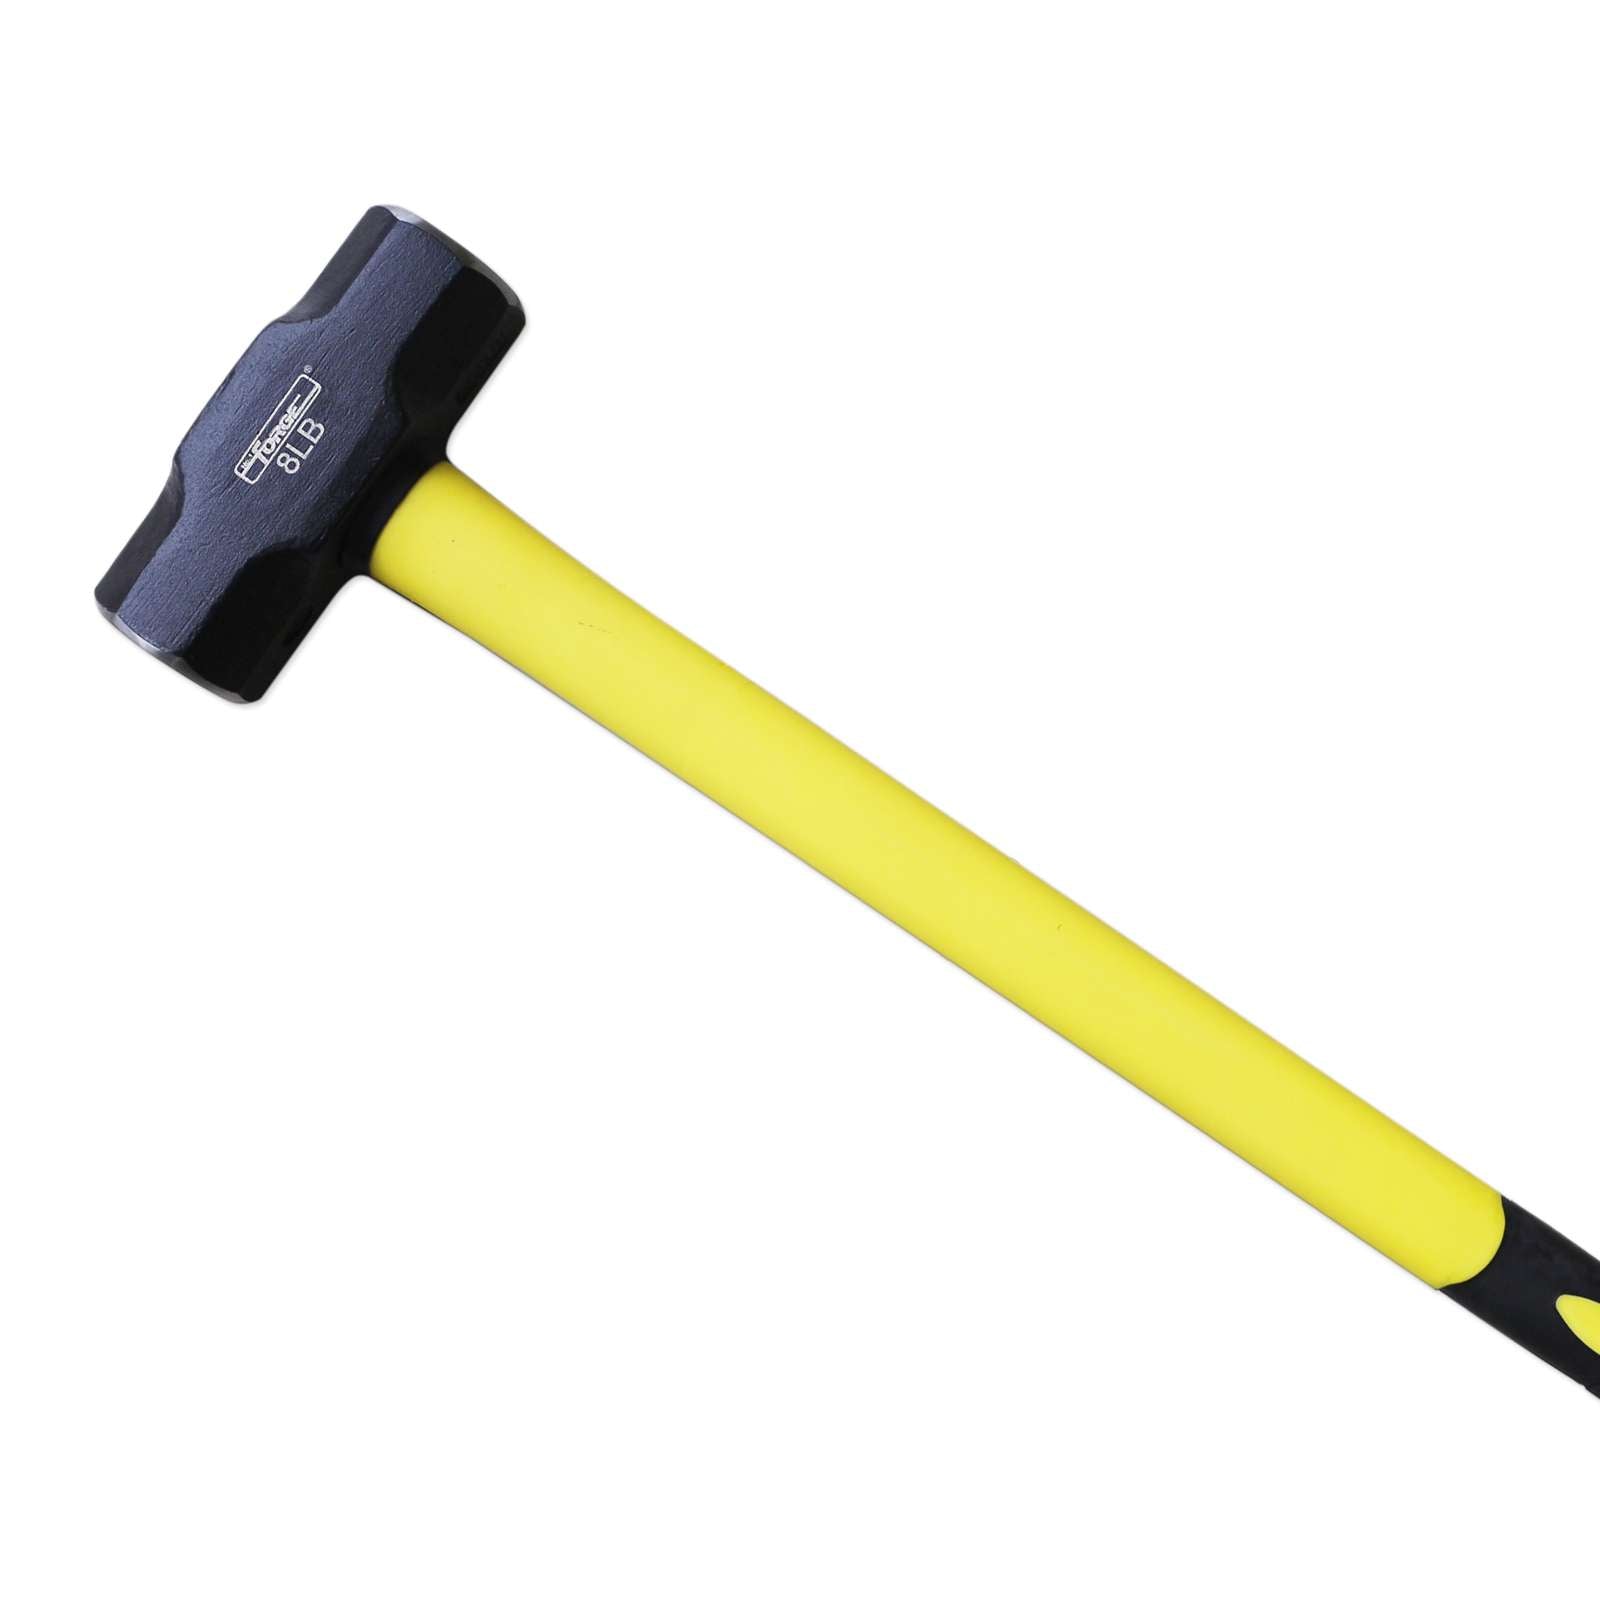 8 lb Drop Forged Steel Head Sledge Hammer with Long Fiberglass Shaft and Rubber Grip - 2